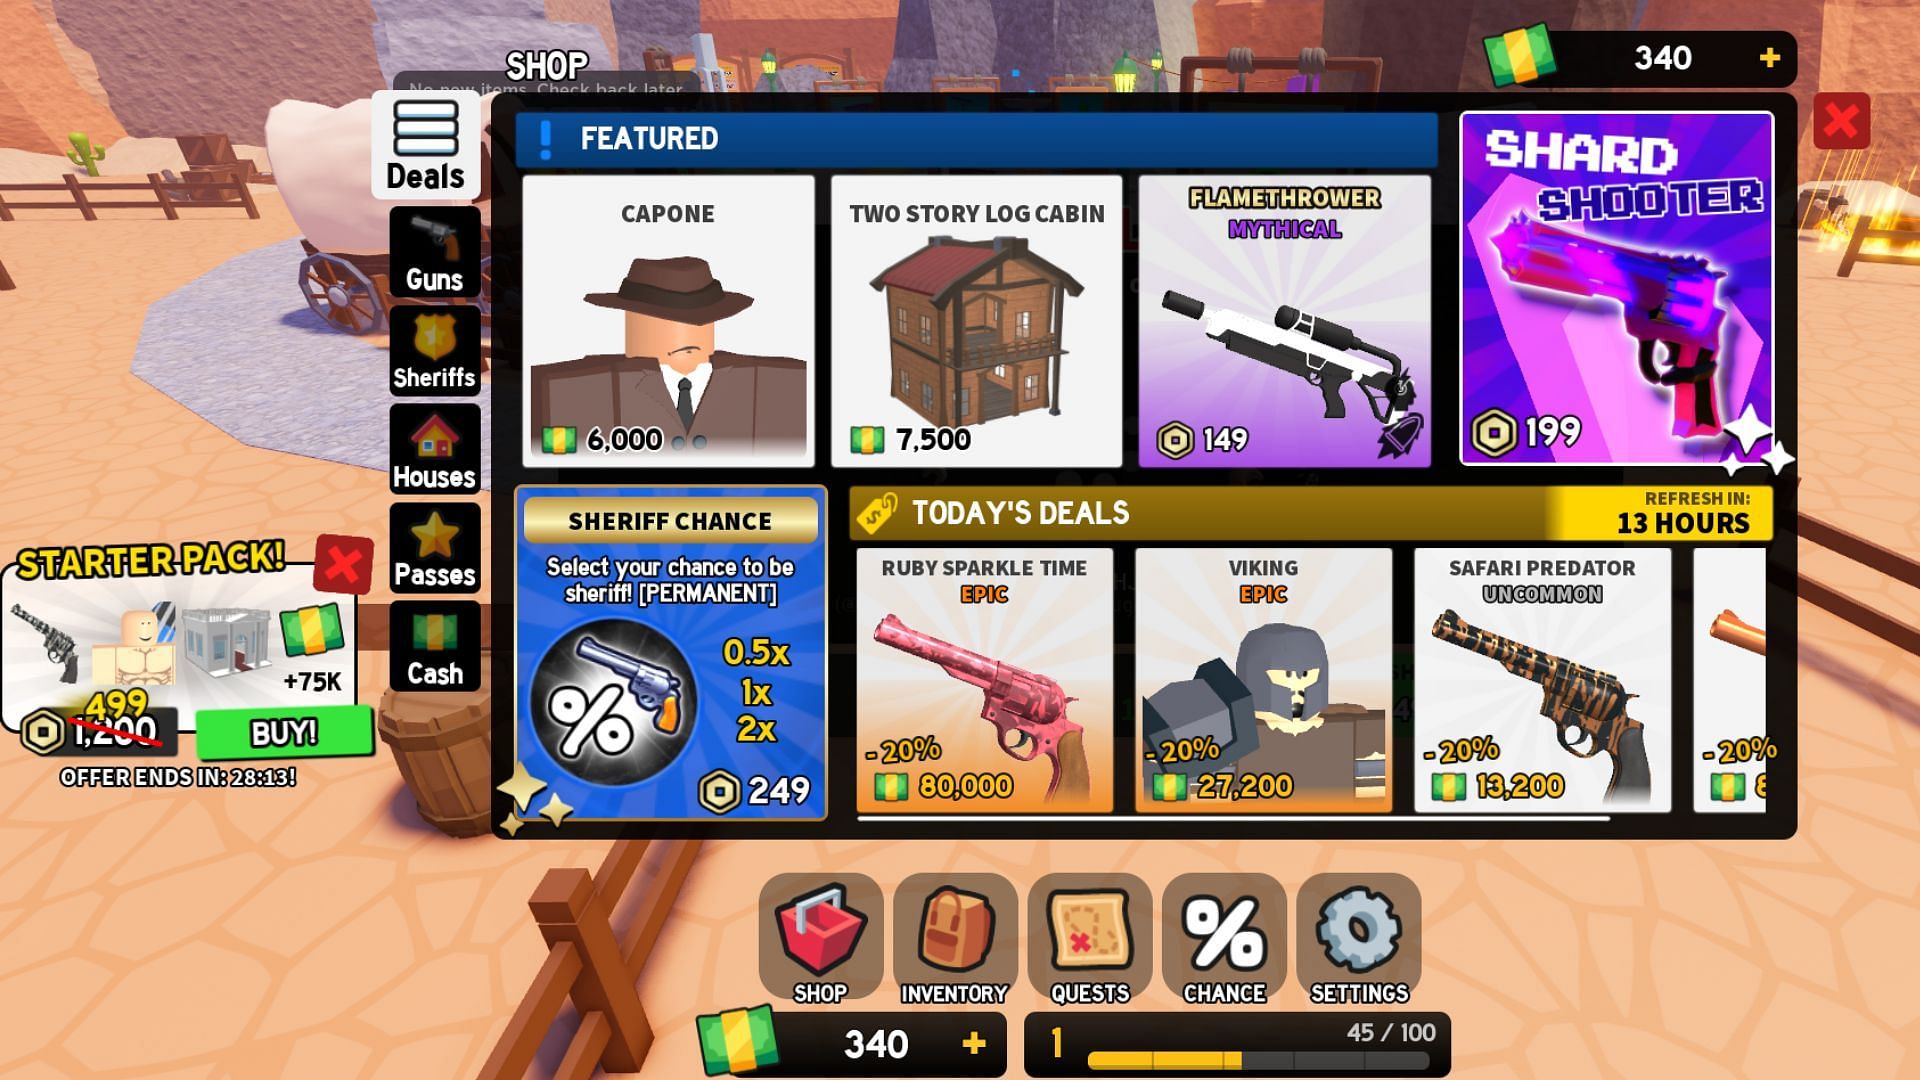 Shop for all the items required for winning in Be NPC or Die (Image via Roblox)